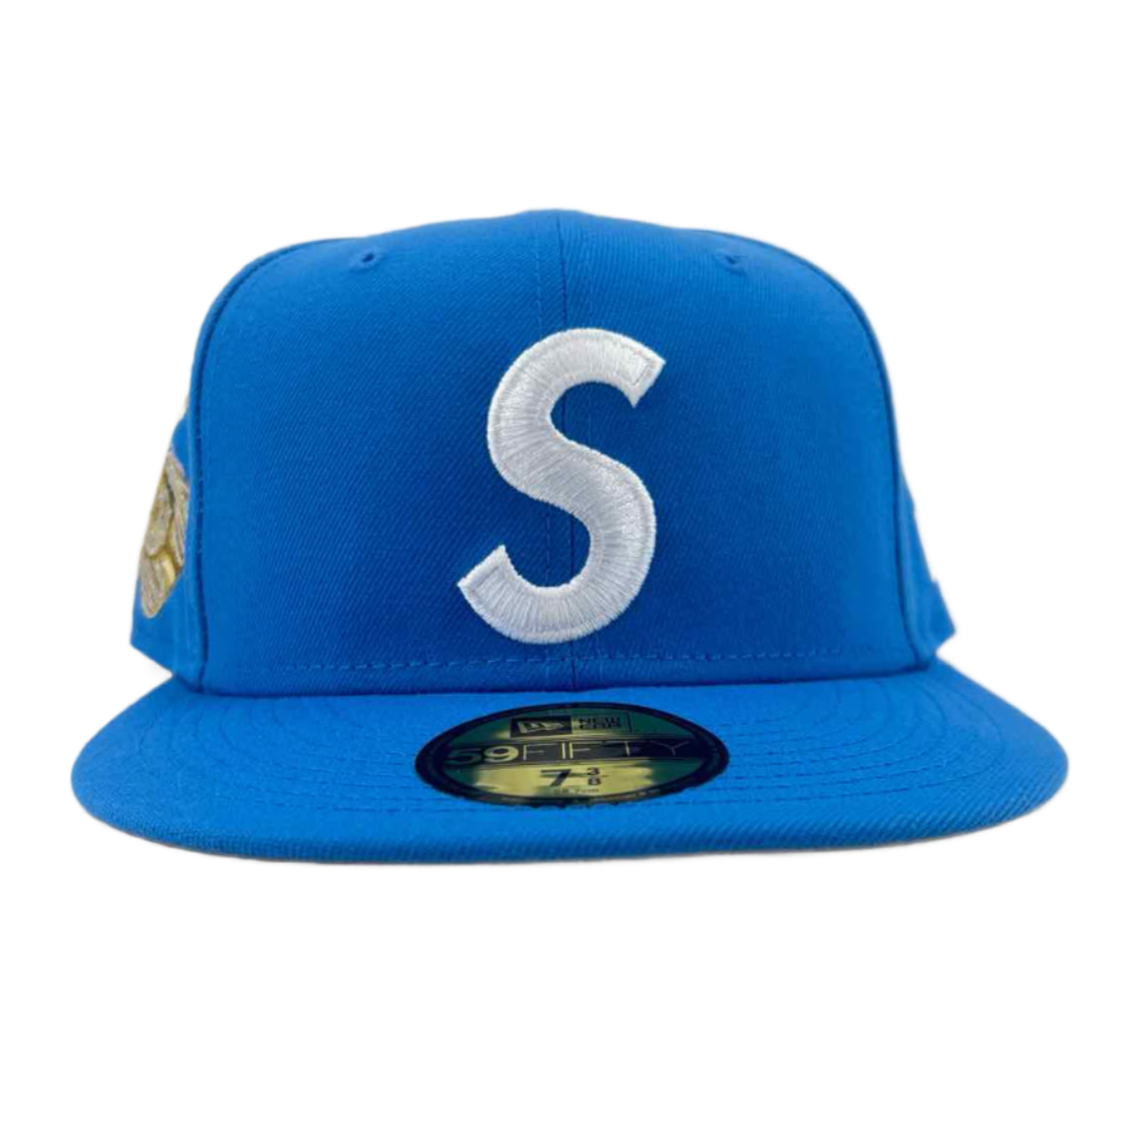 Supreme Fitted Hat "JESUS PIECE" New Baby Blue Size 7 3/8